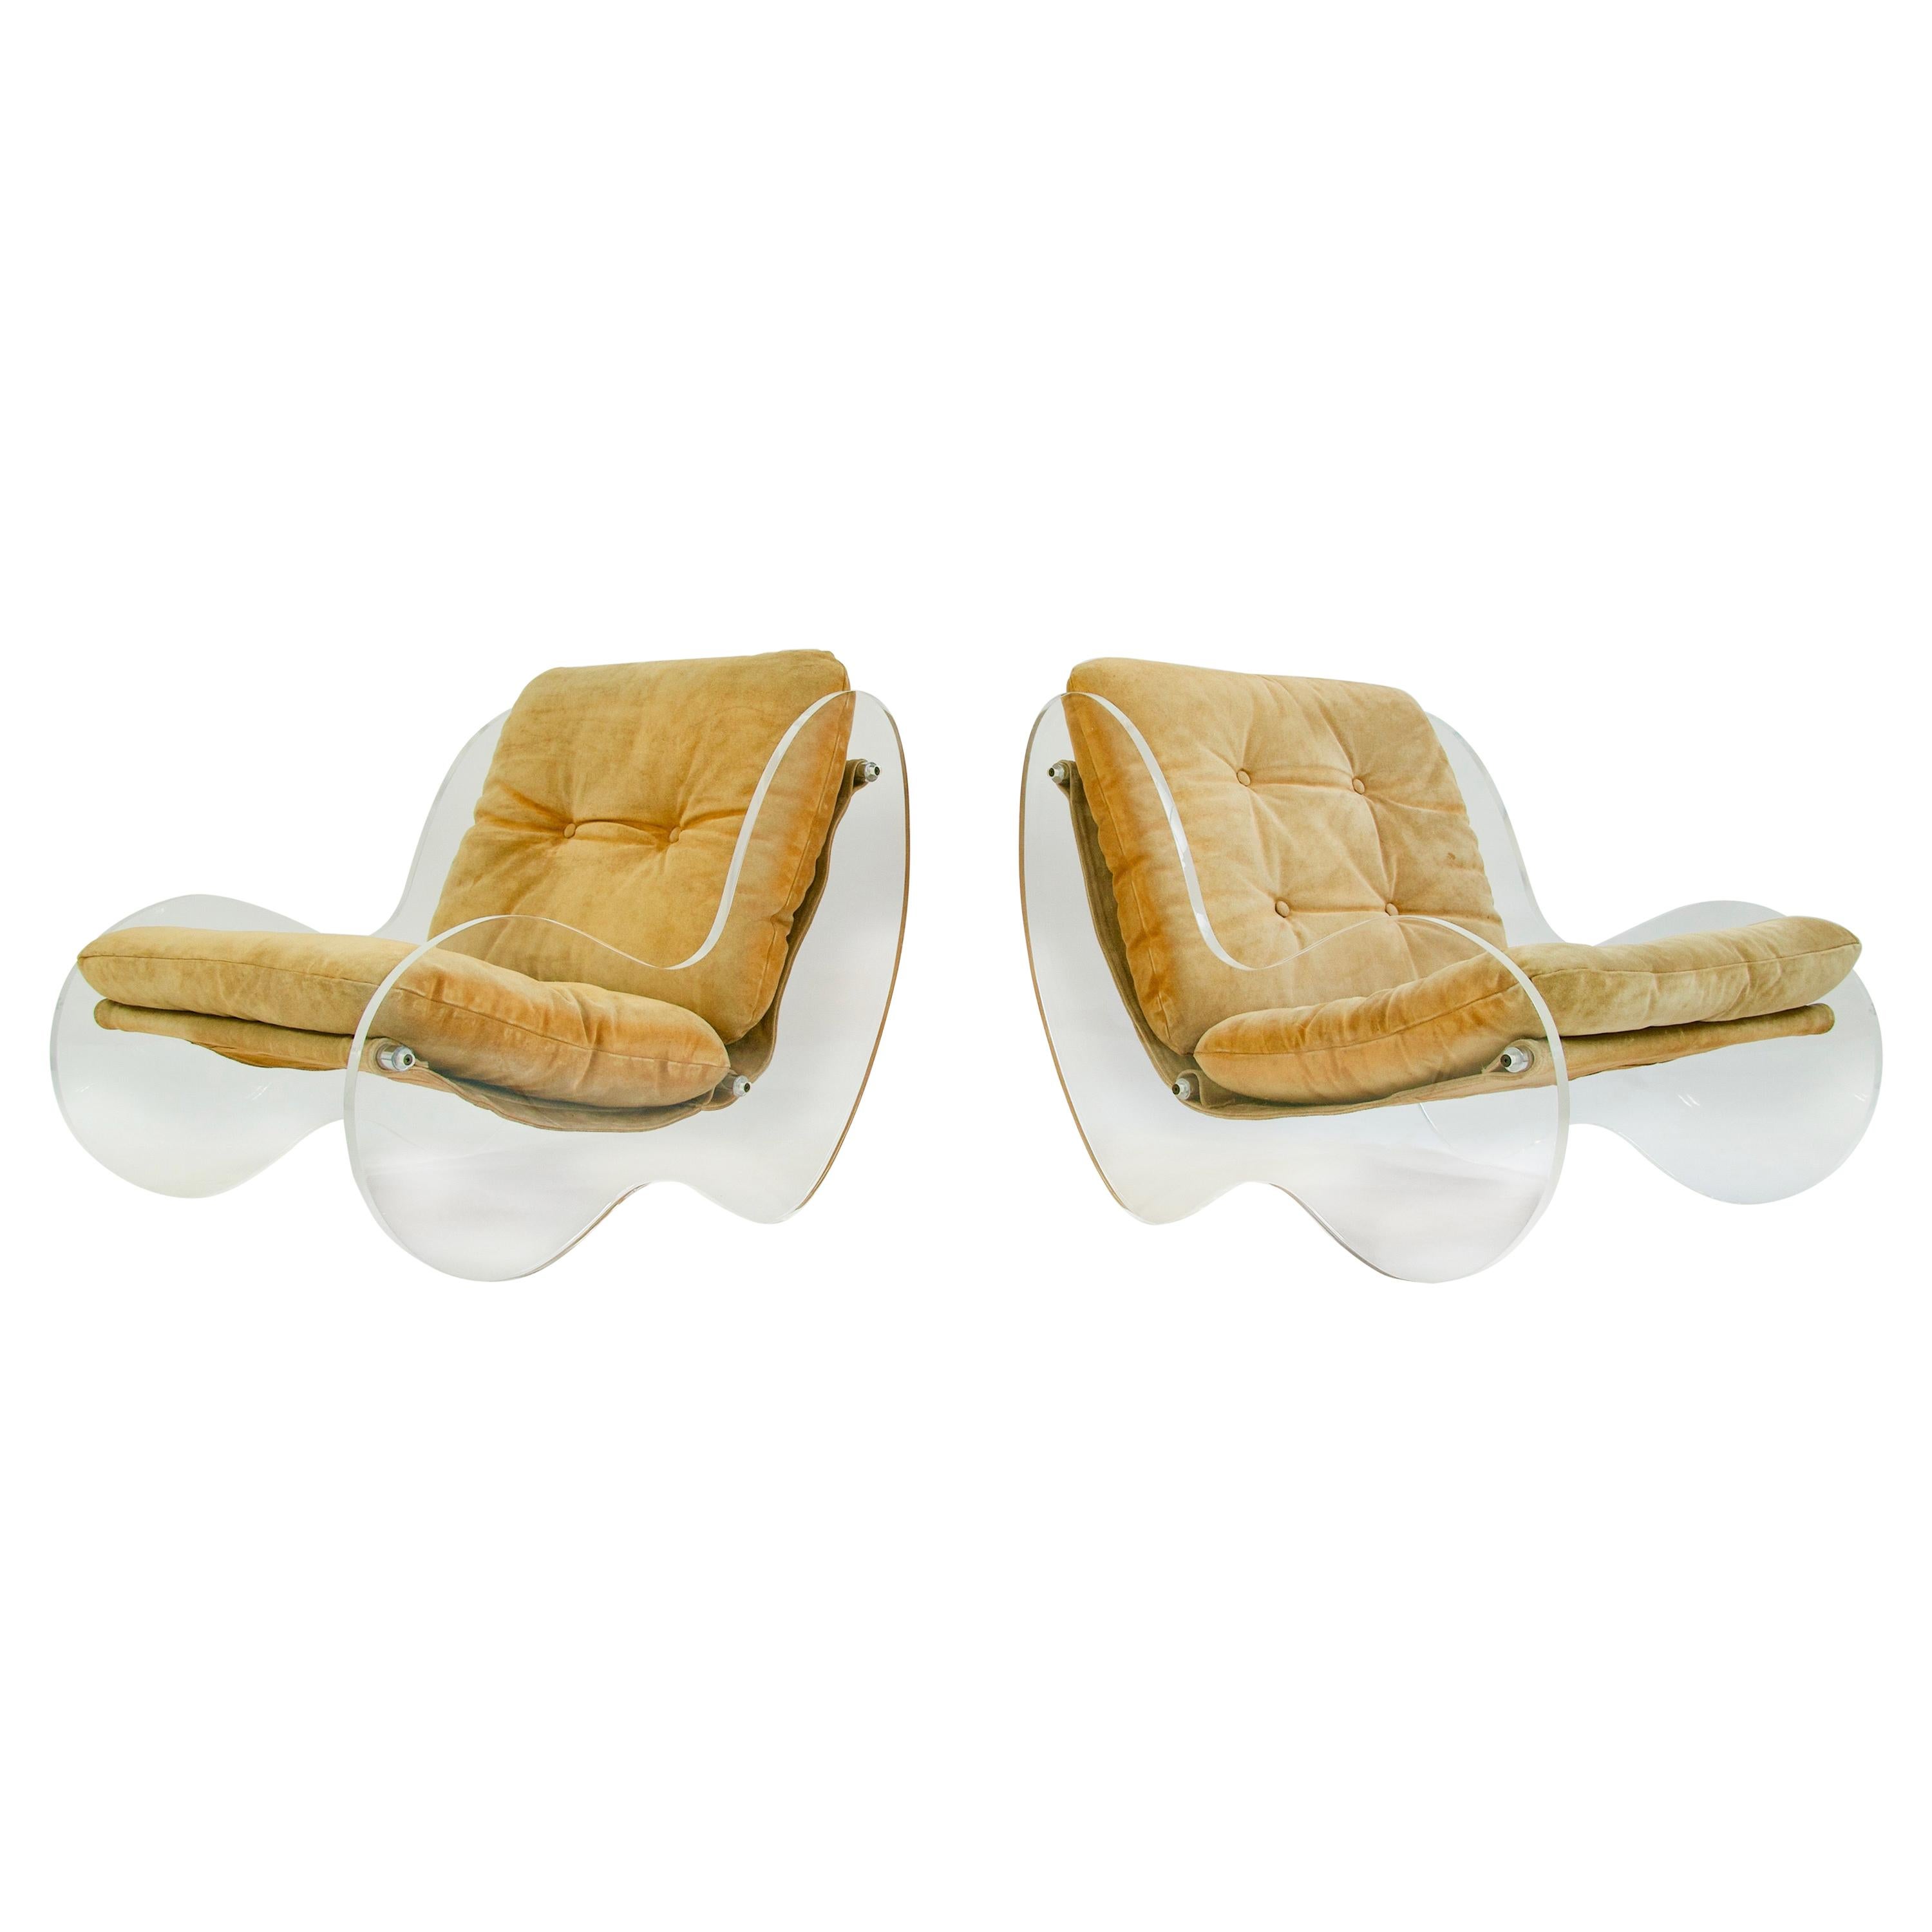 Poul Norreklit Lucite Lounge Chairs